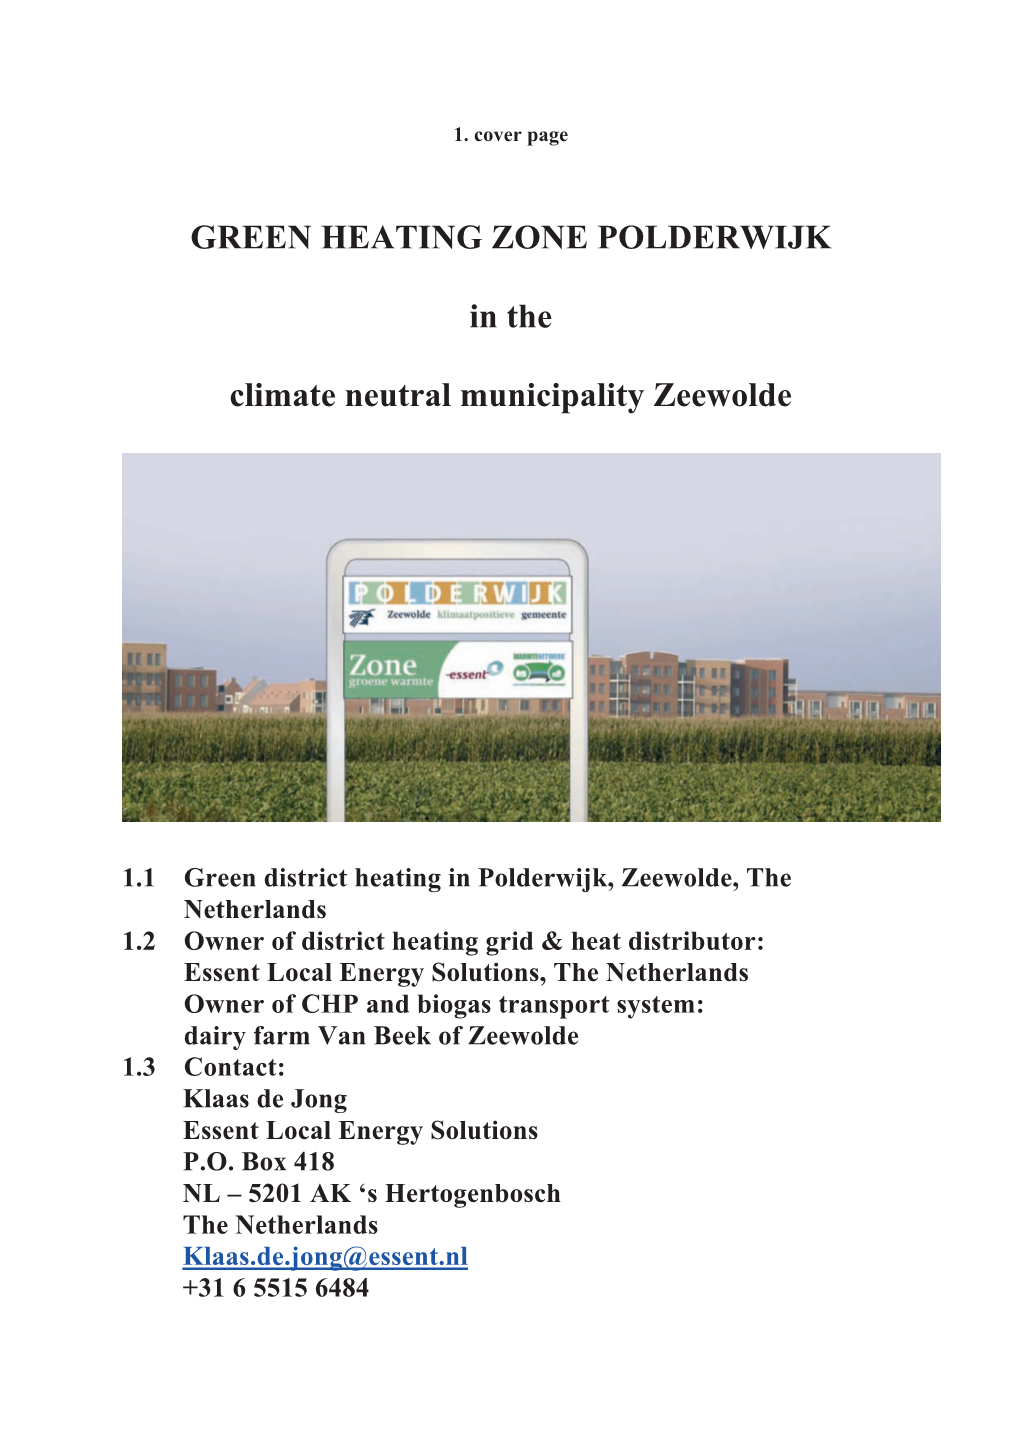 GREEN HEATING ZONE POLDERWIJK in the Climate Neutral